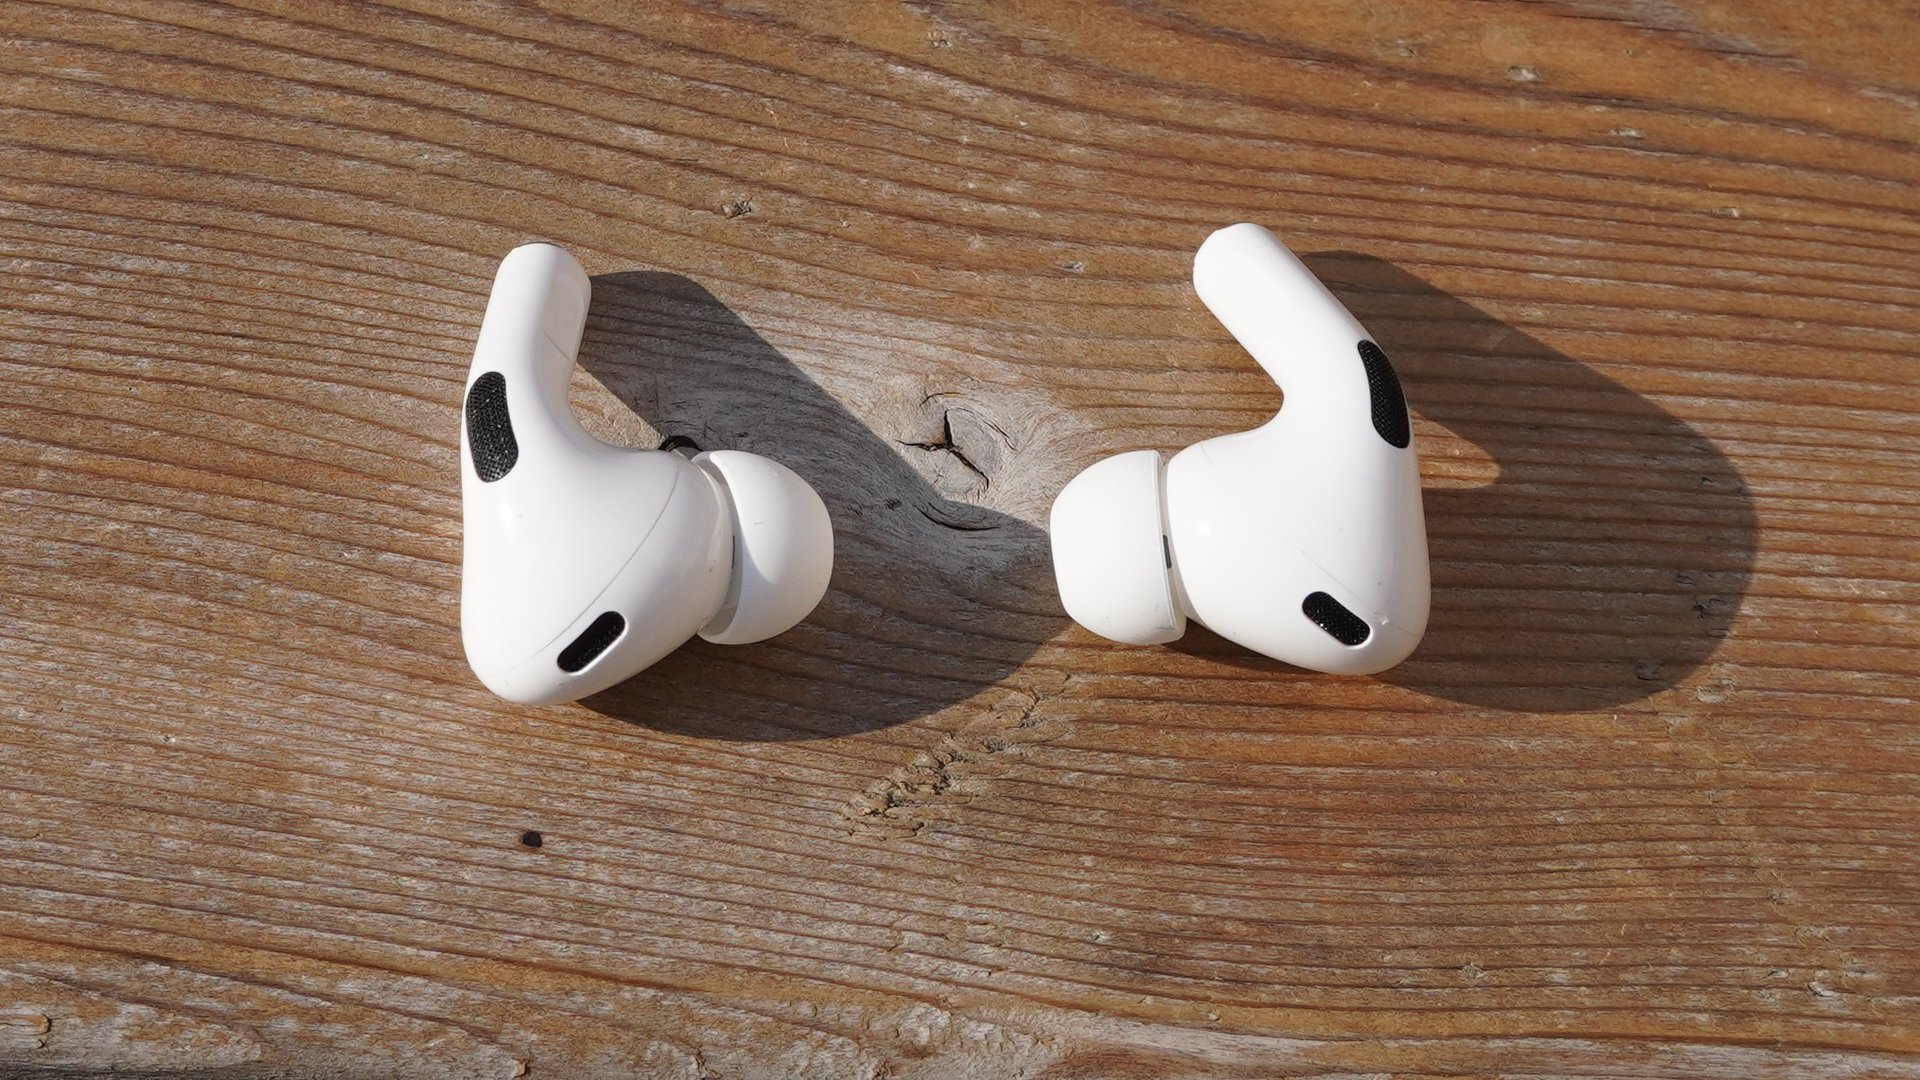 Apple AirPods Pro 3: Every Single Thing We Know So Far - Tech